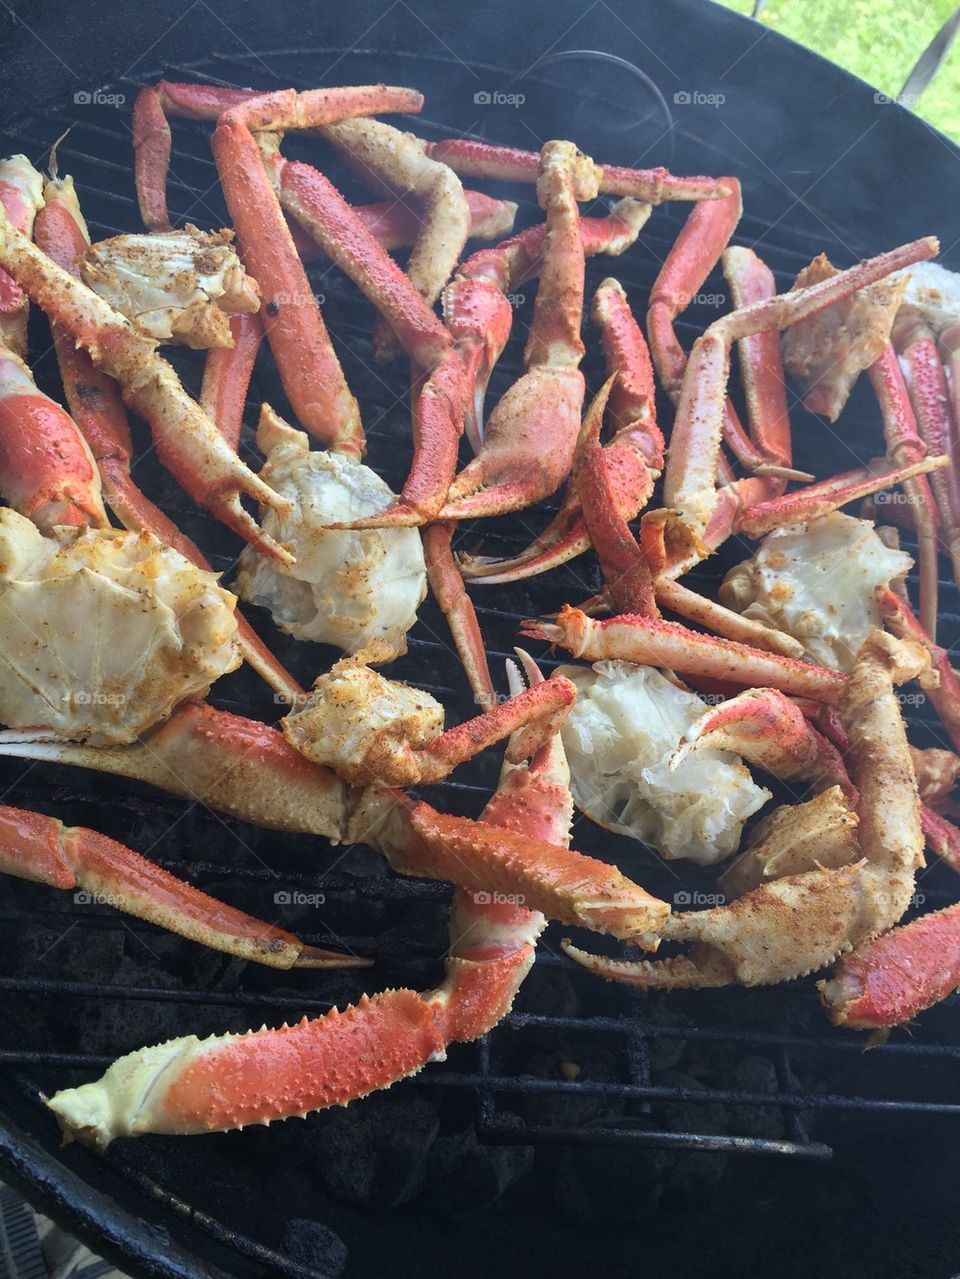 Crablegs on the grill!